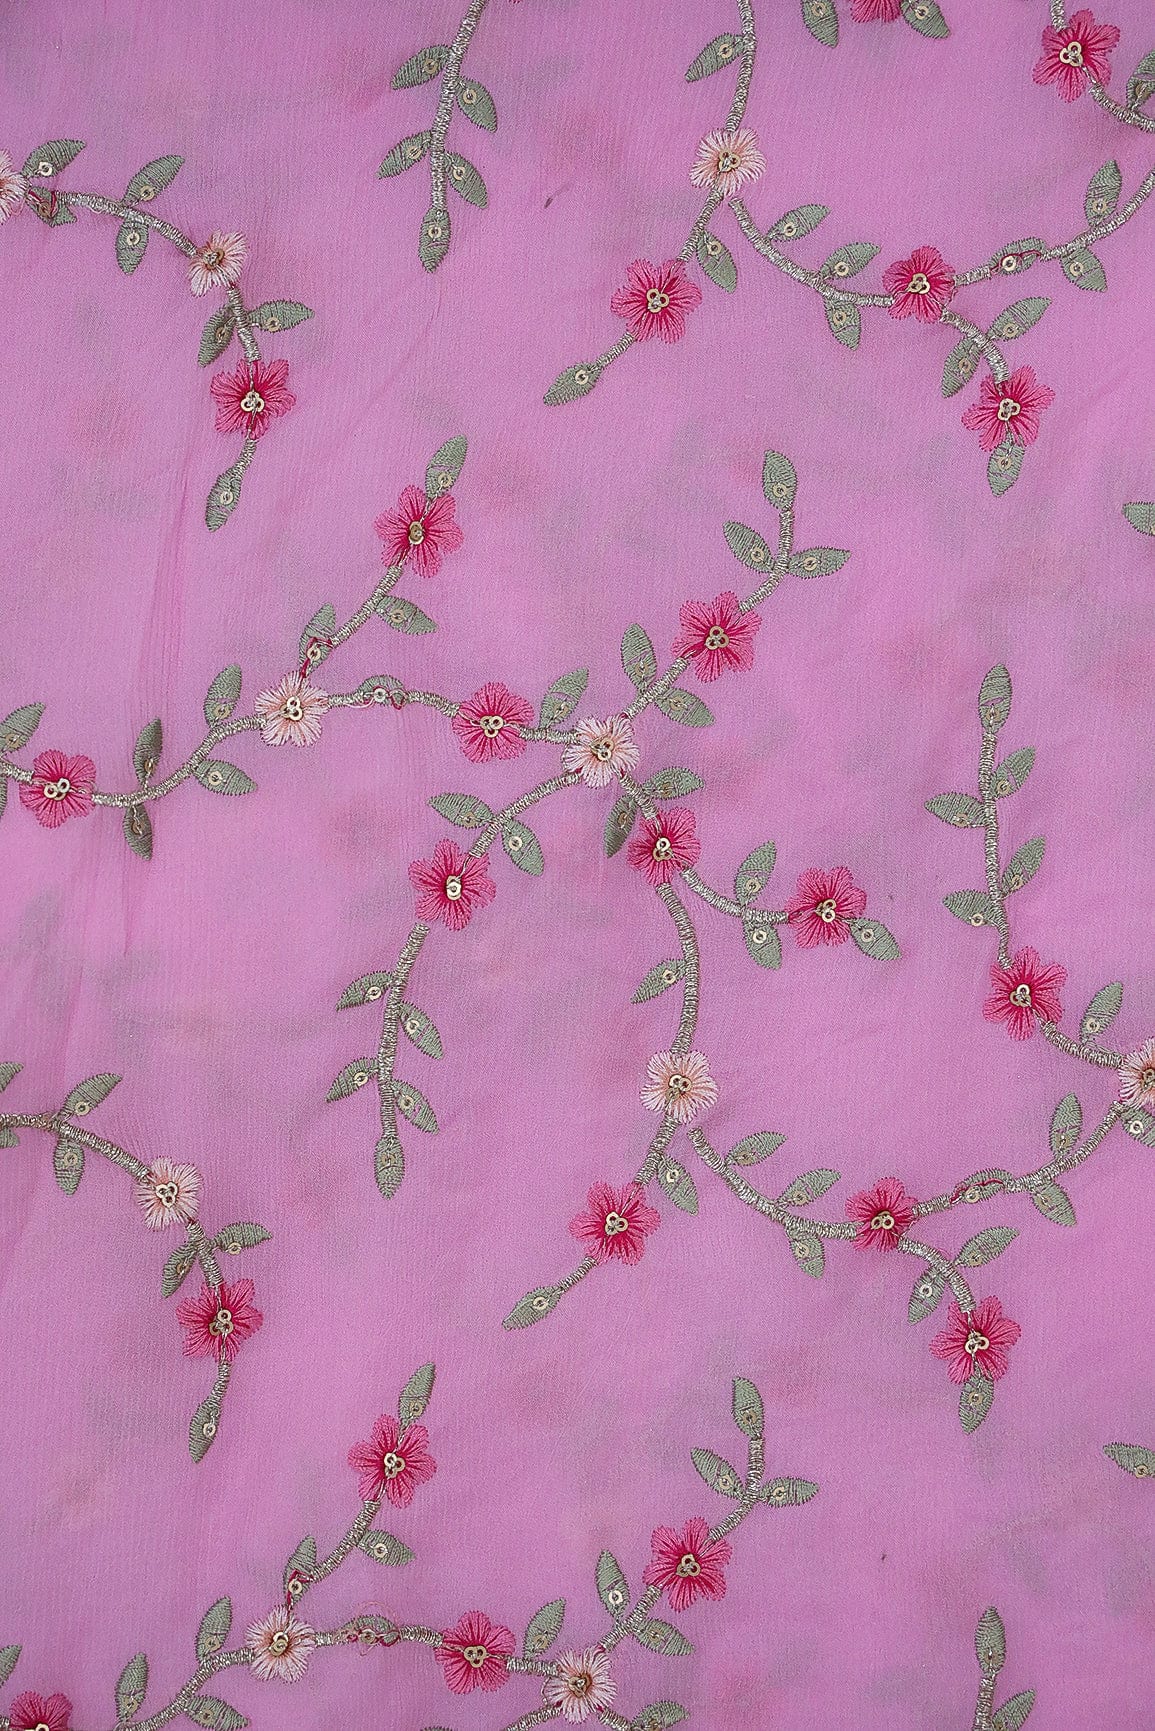 doeraa Embroidery Fabrics Gold Sequins With Floral Embroidery On Pink Chinnon Chiffon Fabric